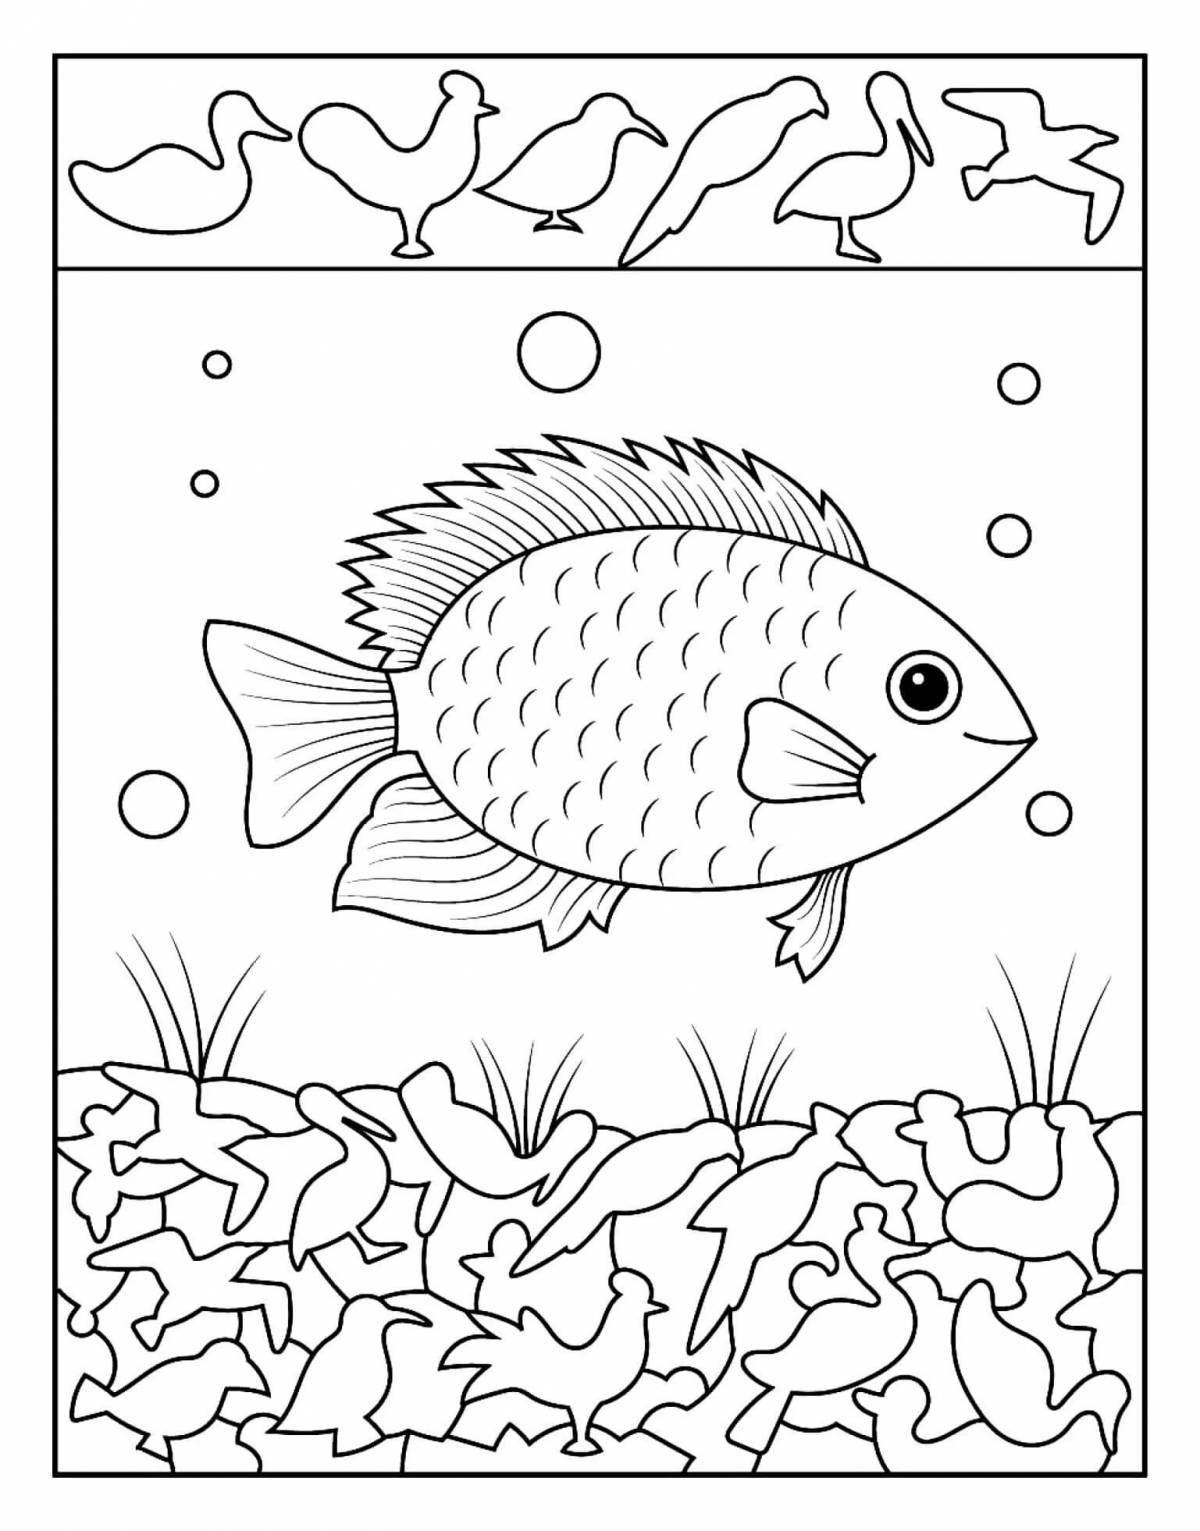 Color-explosive coloring page finders for 5 year olds